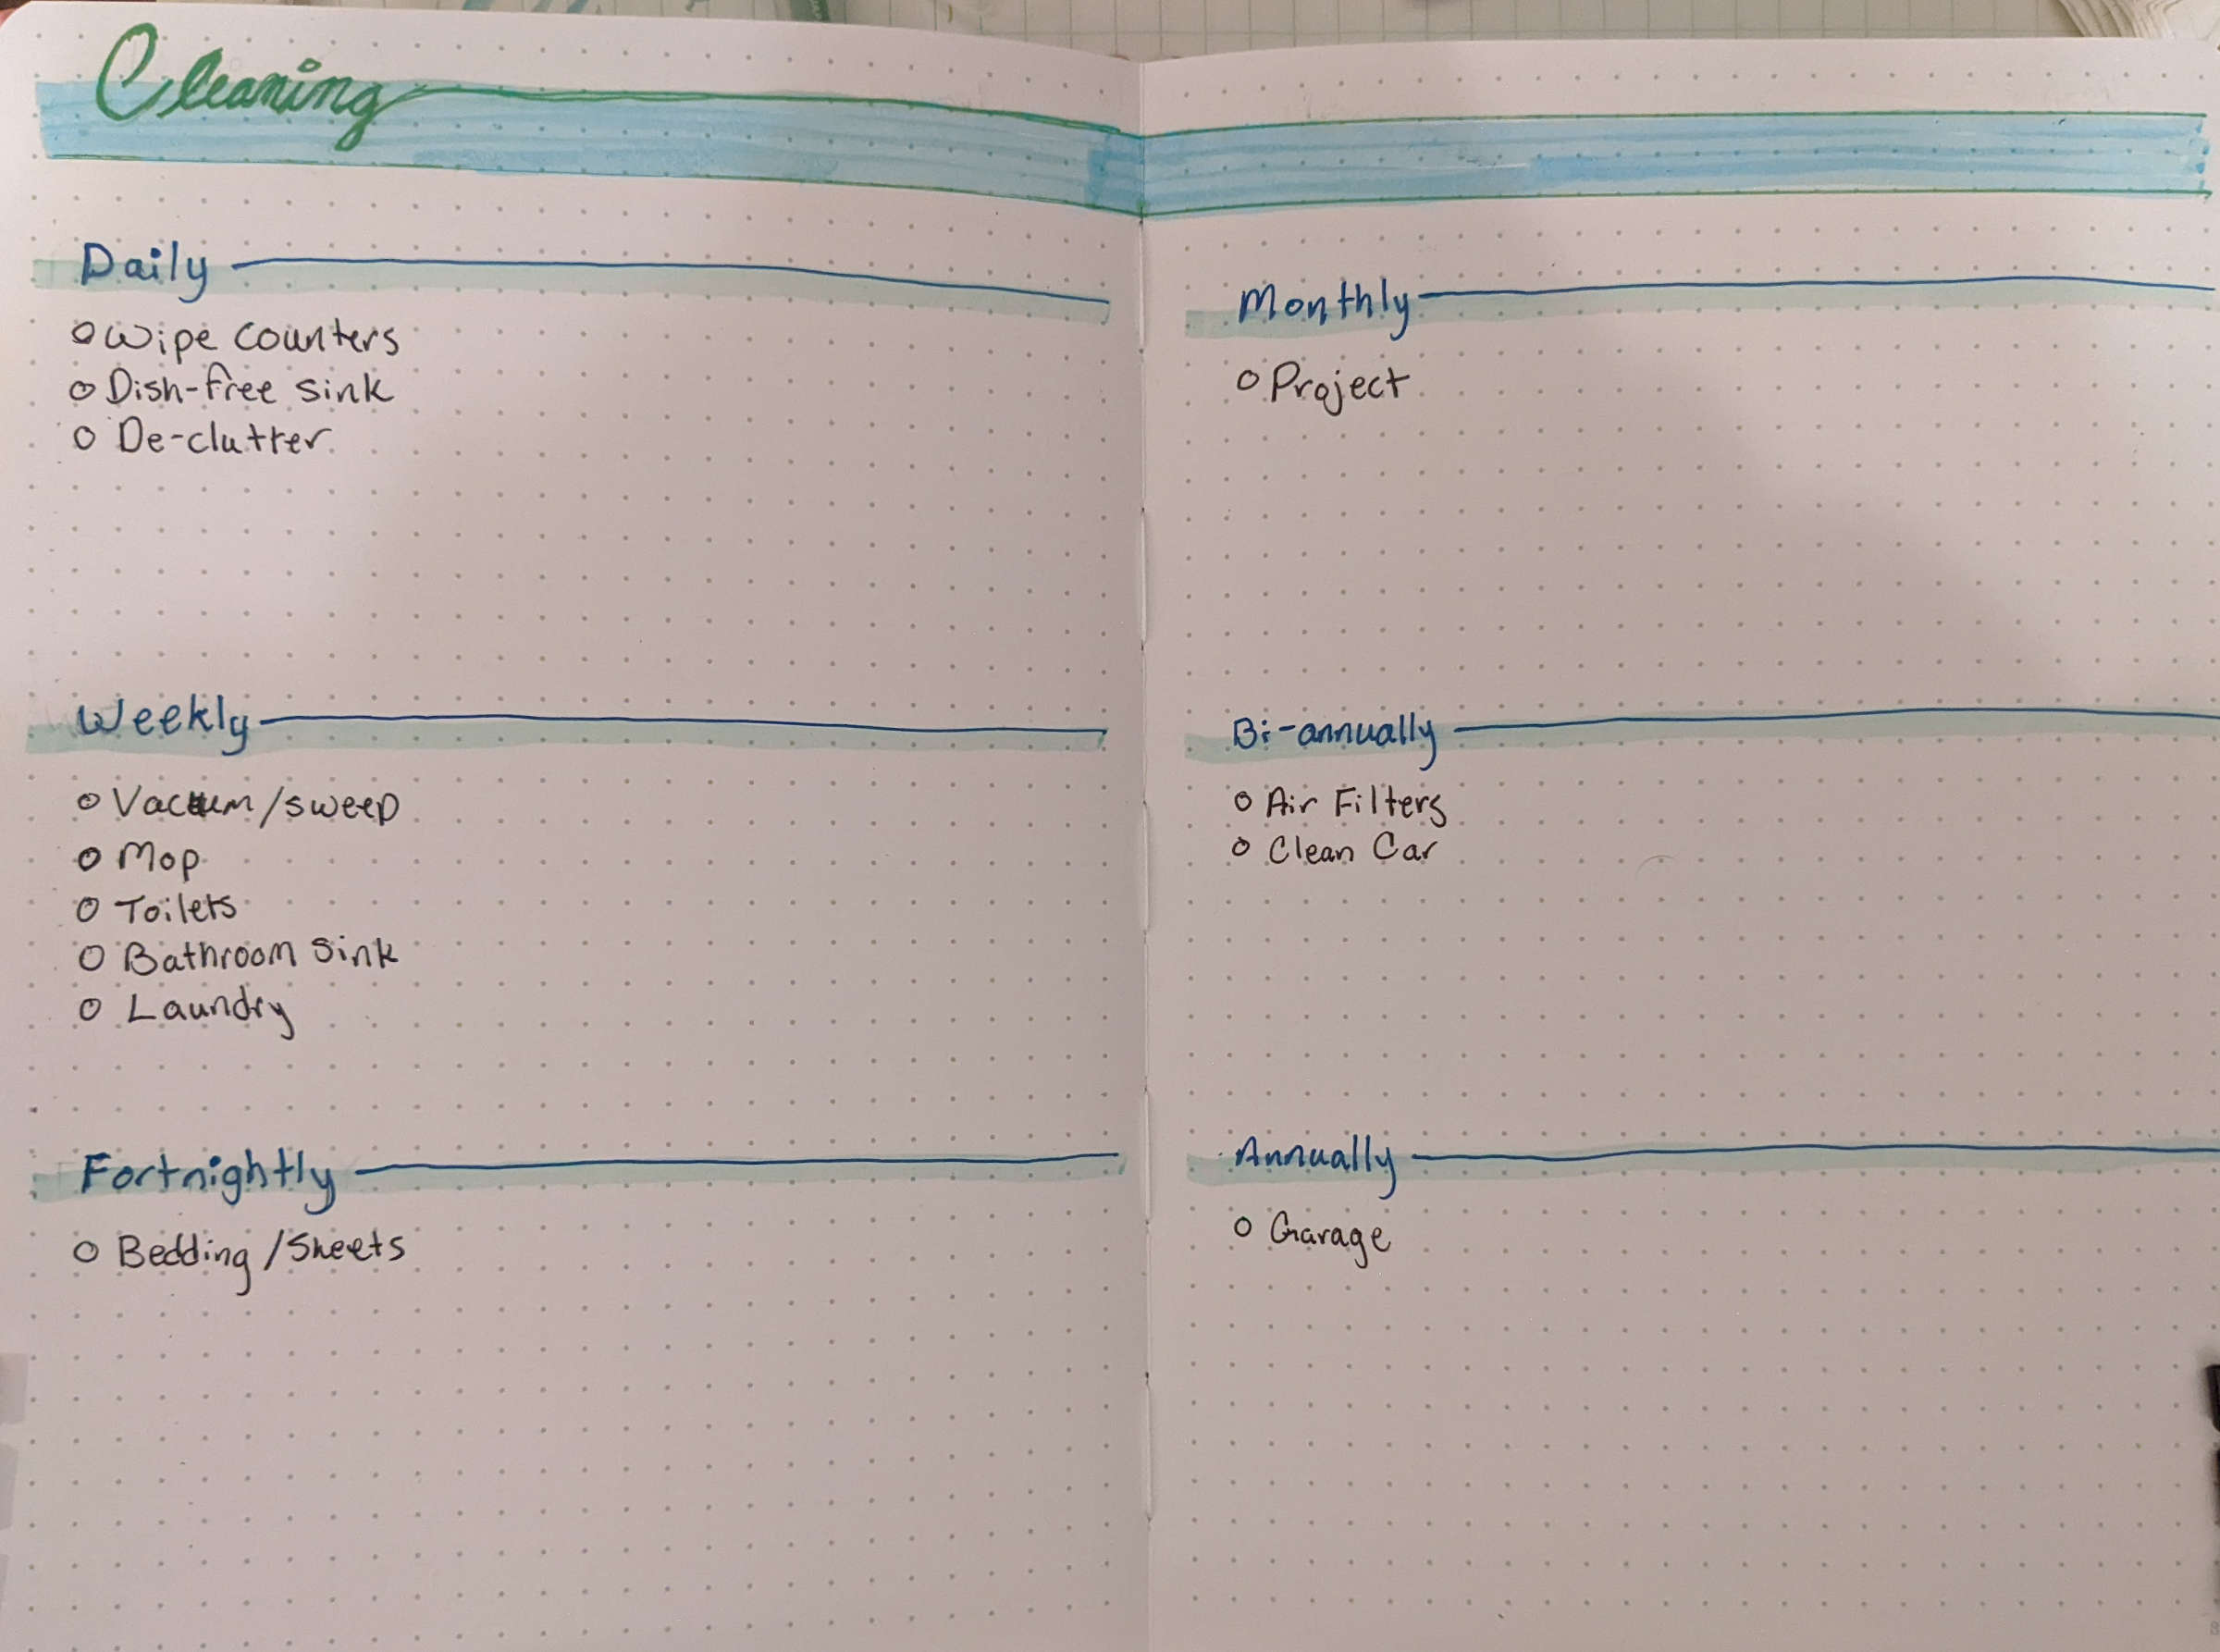 Two-page bullet journal spread for cleaning tasks - daily, weekly, fortnightly, monthly, bi-annually, and annually.